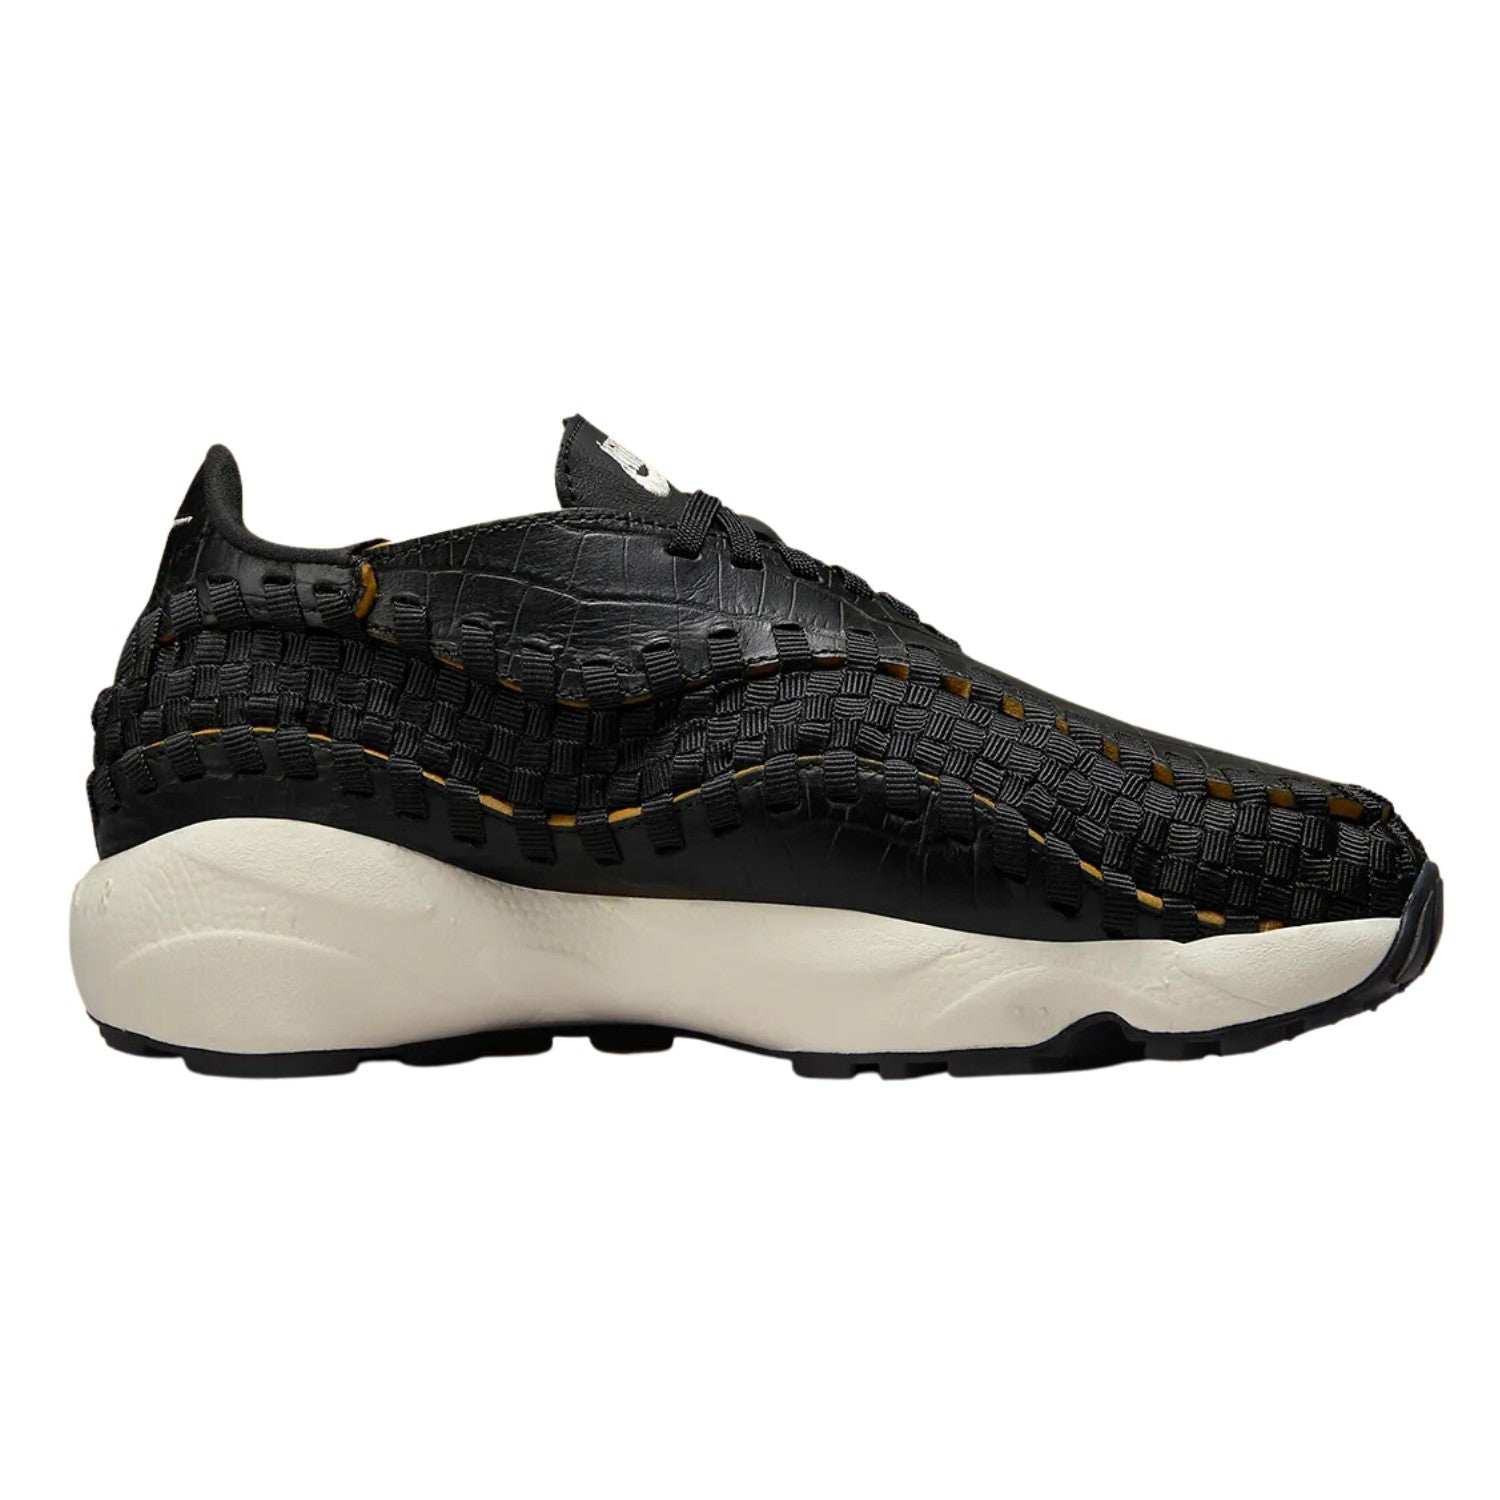 Nike Air Footscape Woven Prm Mens Style : Fq8129